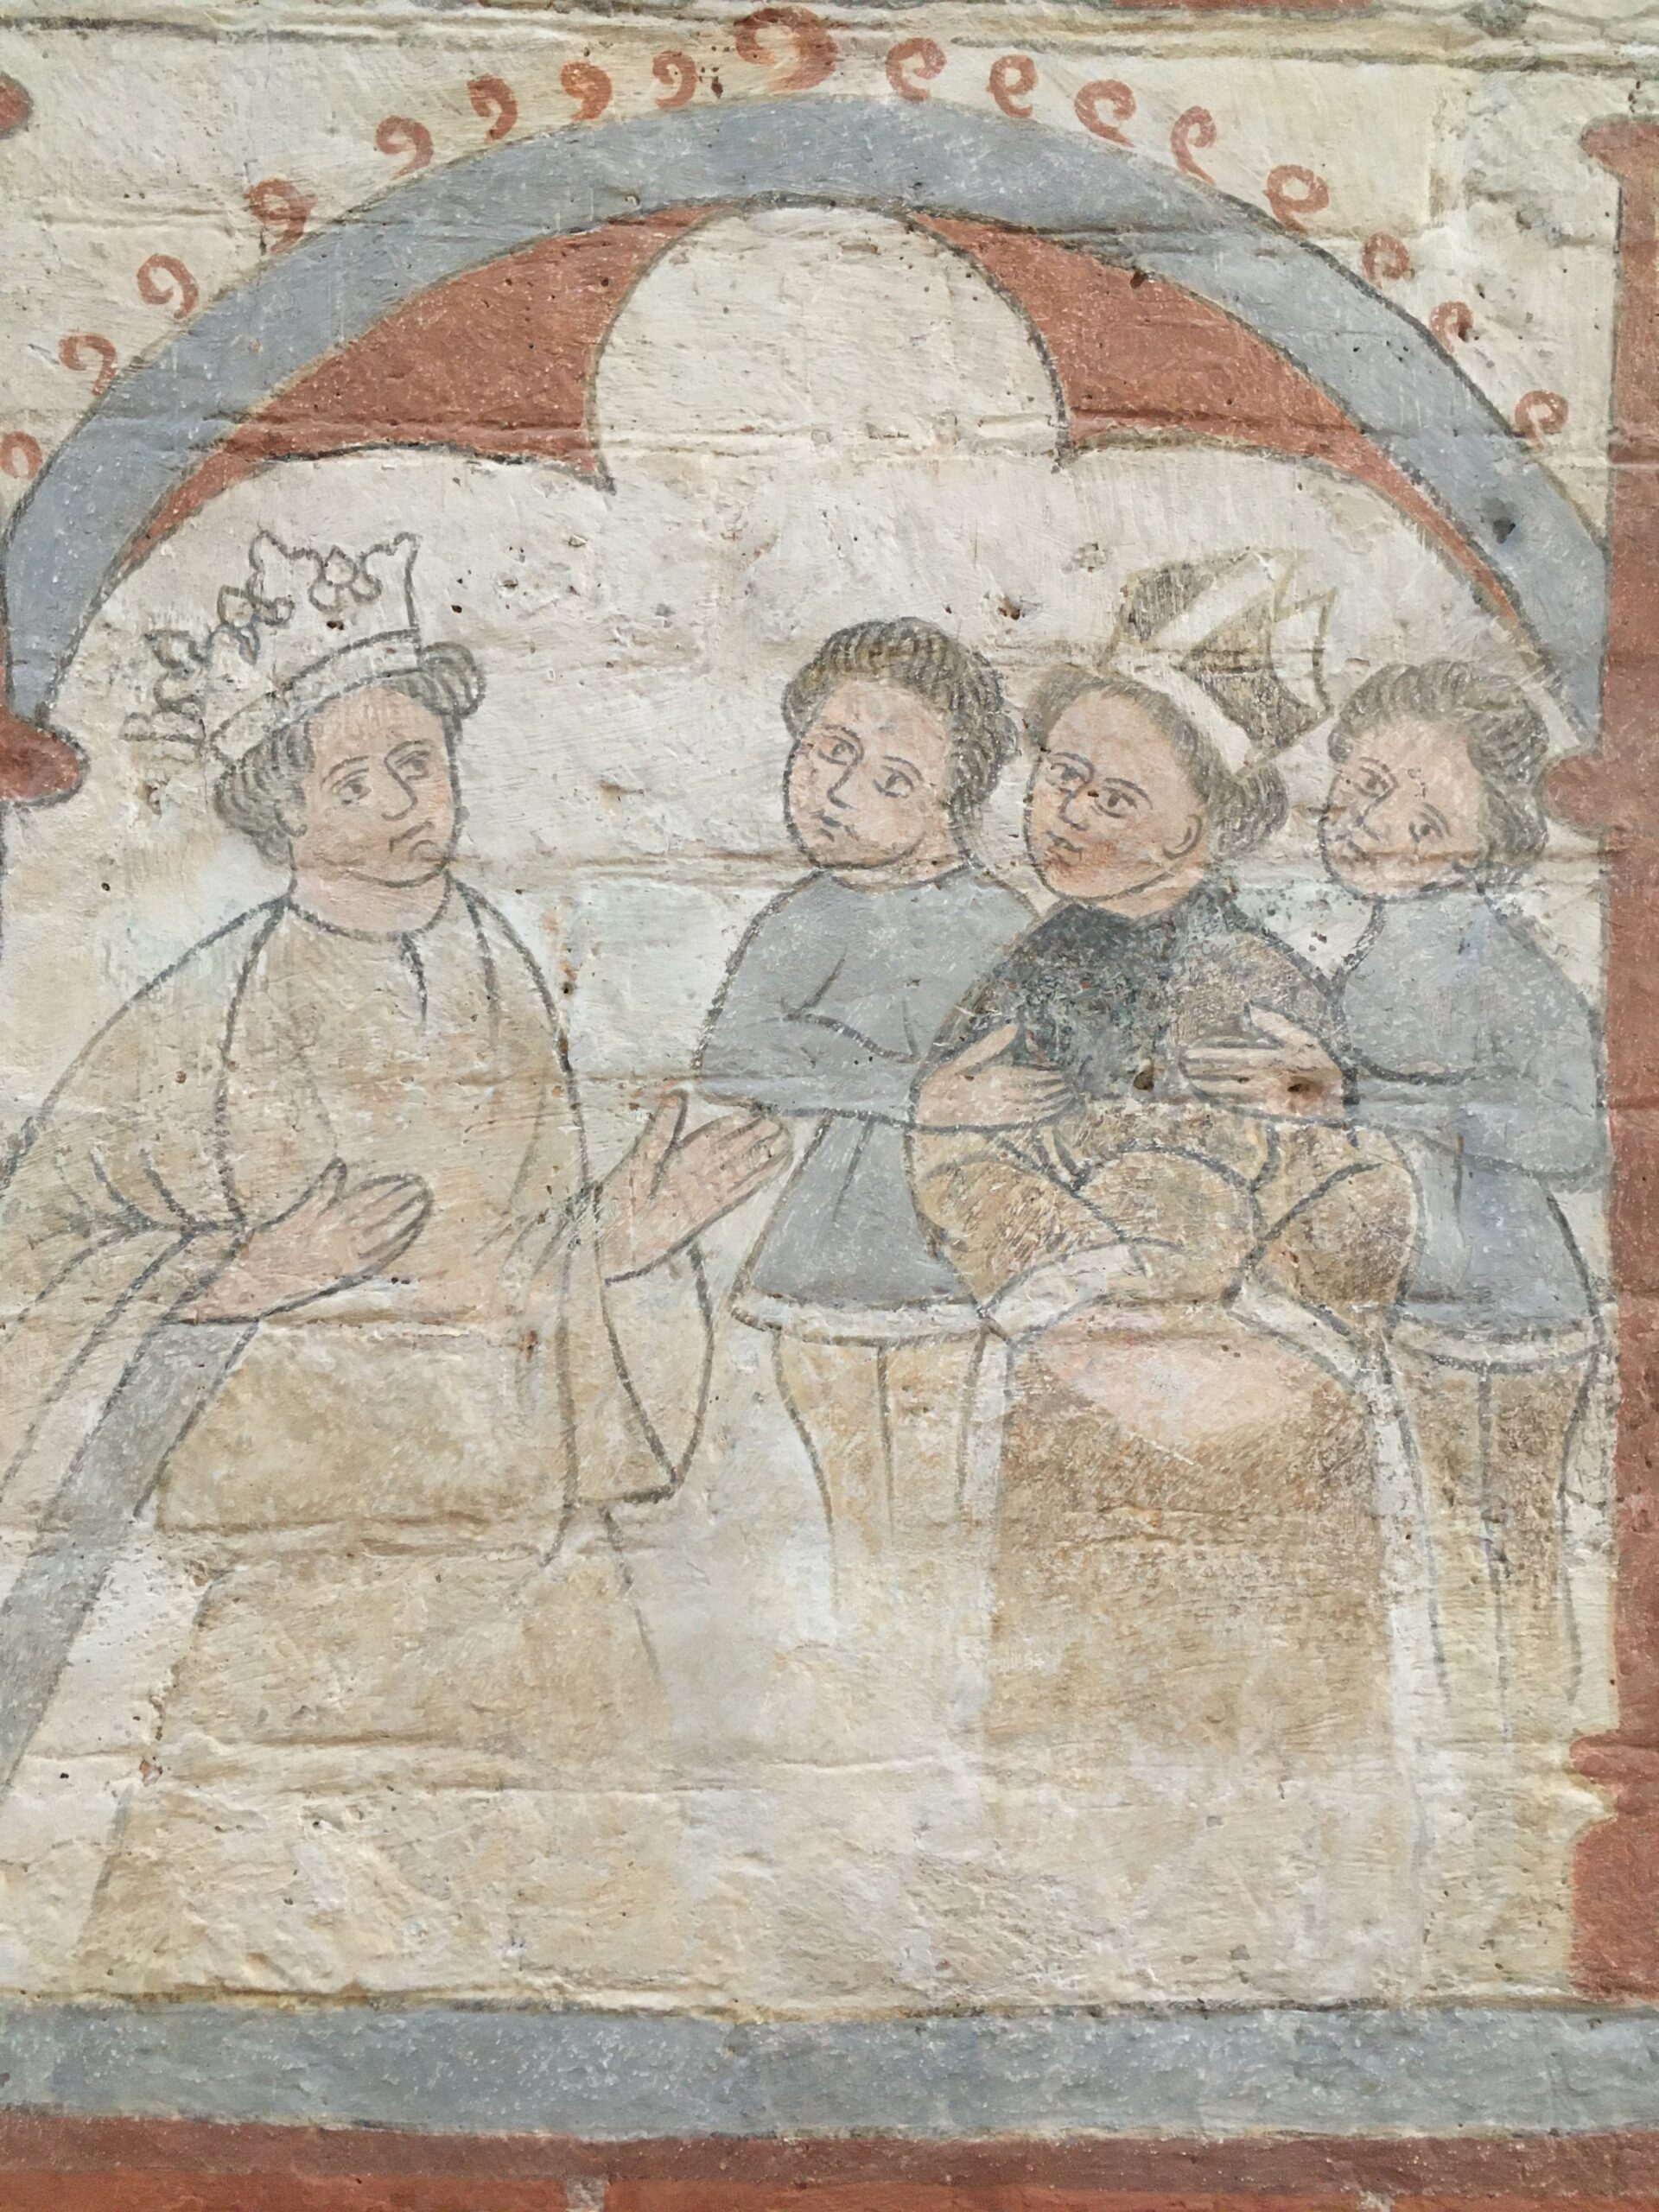 Medieval church painting where a king talks to a bishop, as well as two other men.